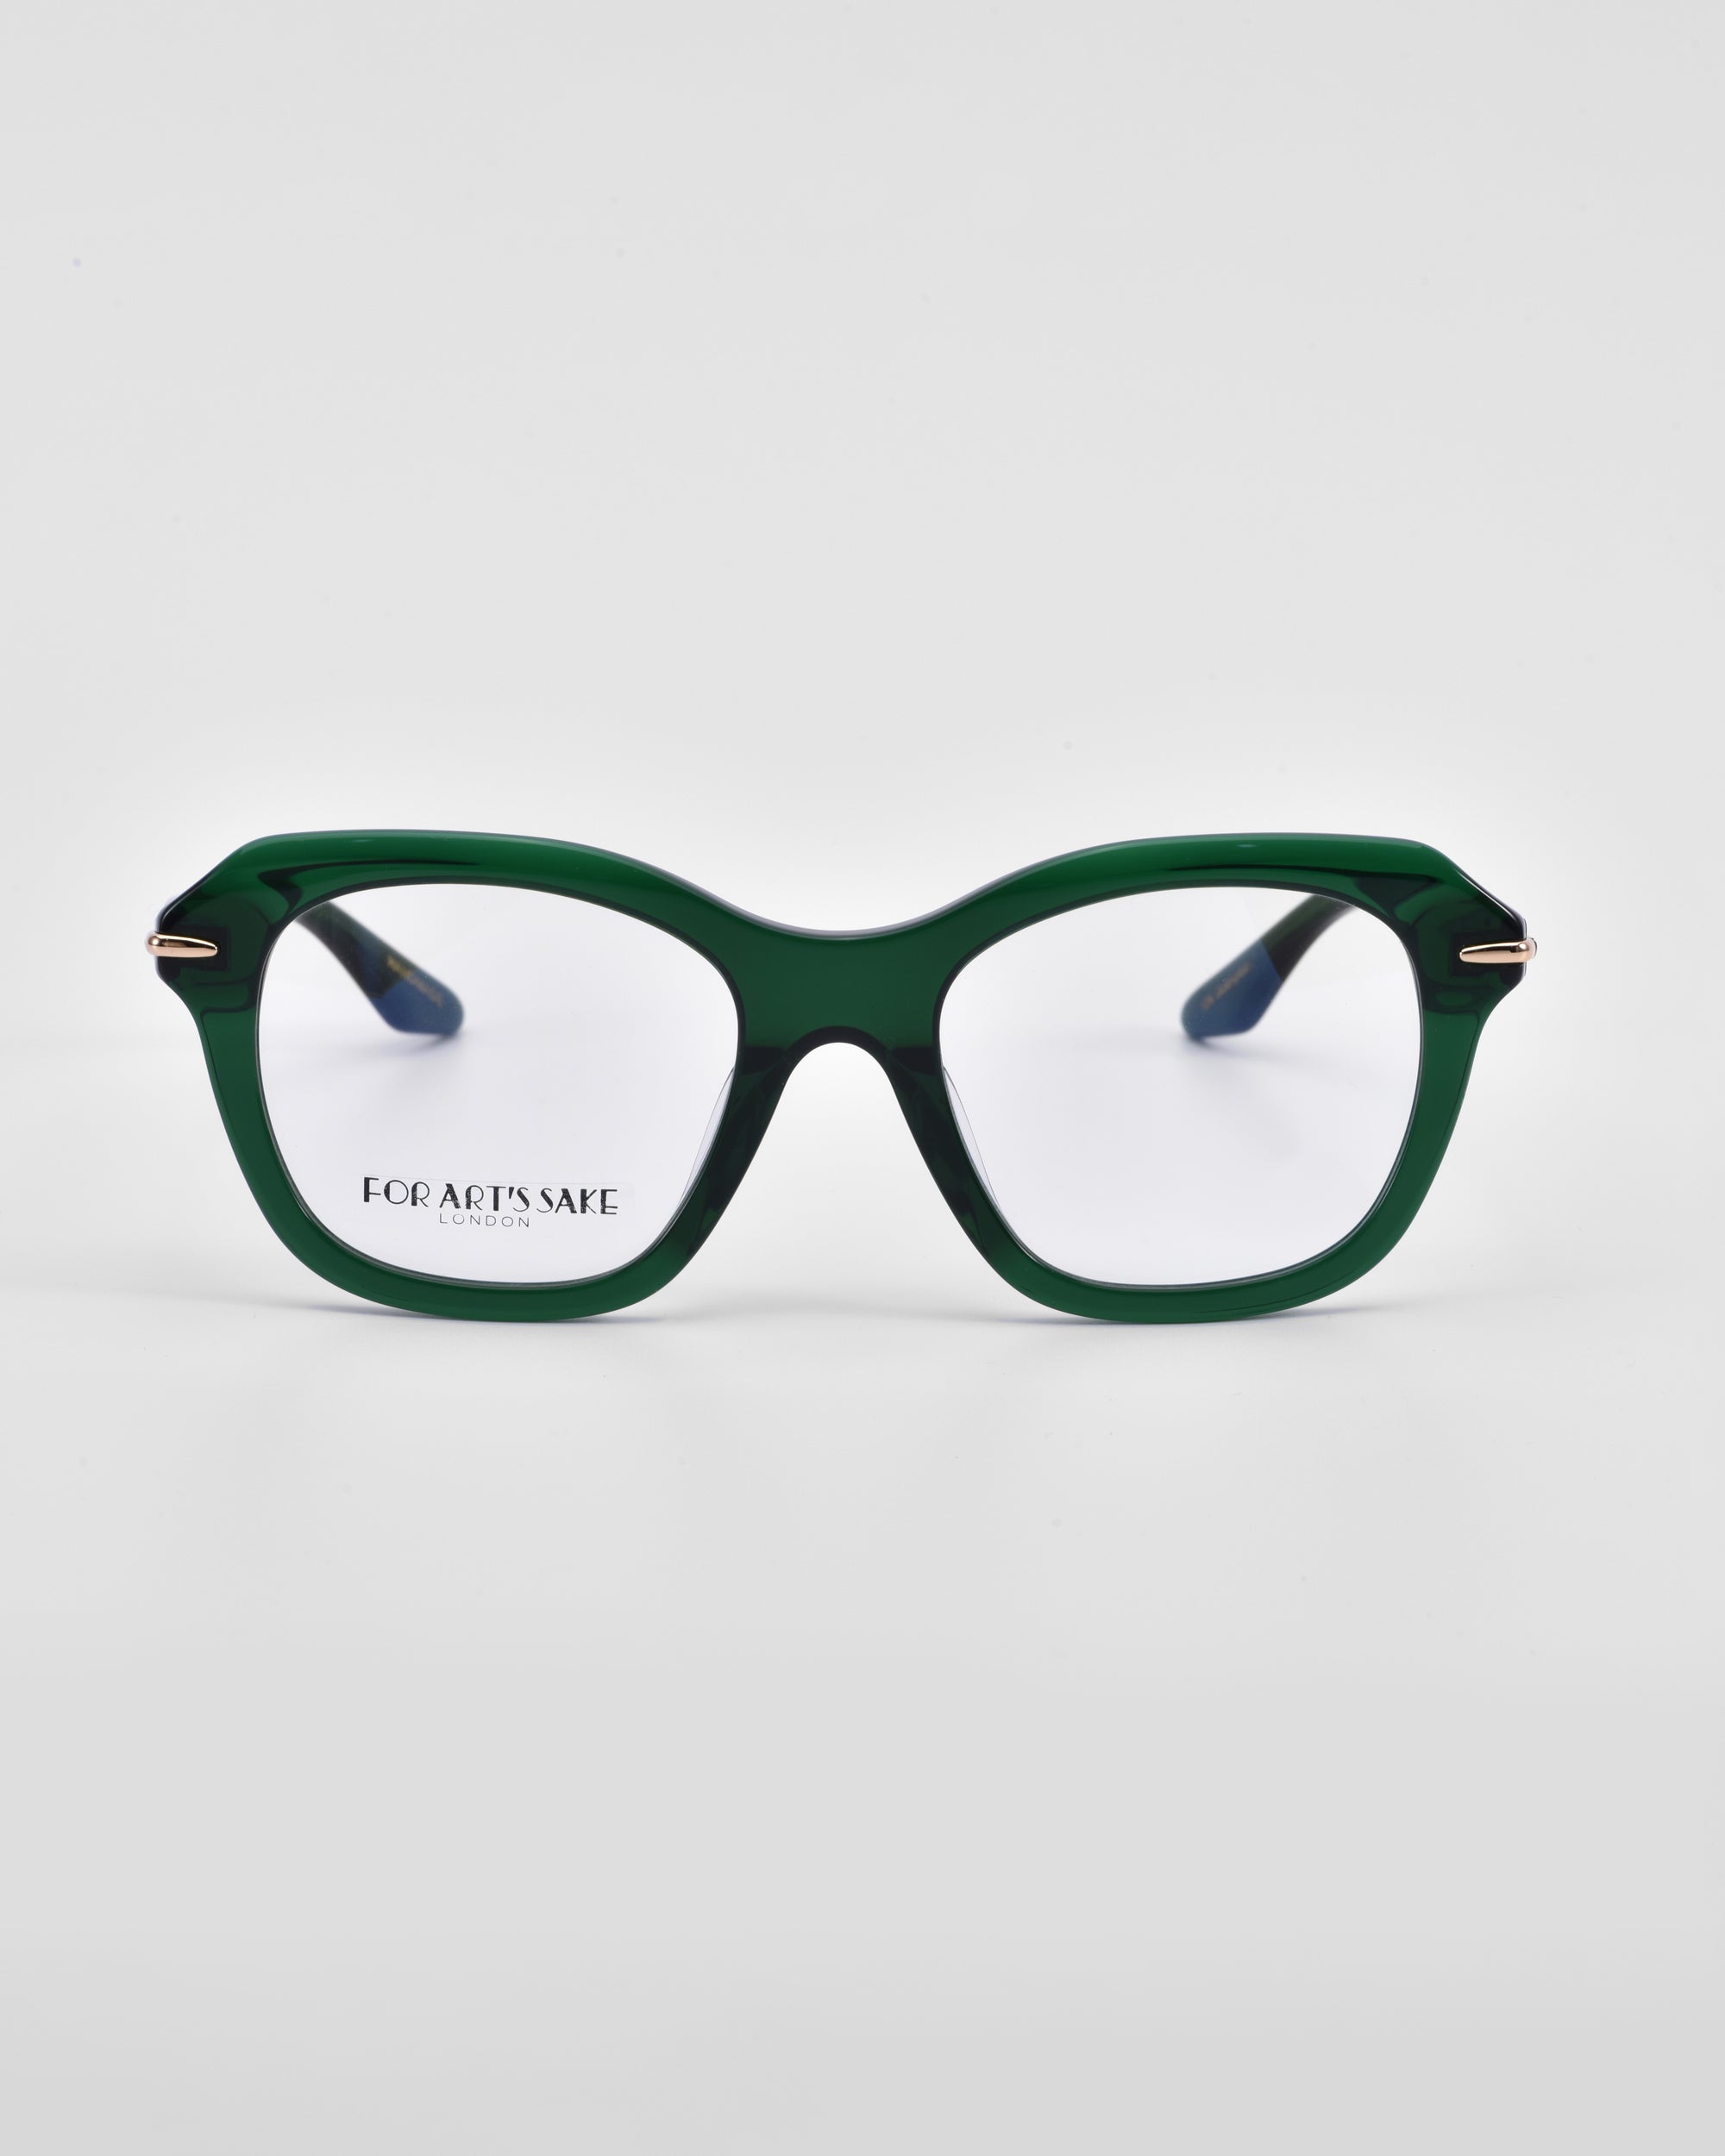 A pair of green, square-framed eyeglasses with subtle 18-karat gold plating on the hinges. The lenses are clear, and the product name &quot;Helene&quot; and brand name &quot;For Art&#39;s Sake®&quot; are visible on the inside of the left lens. The background is white.